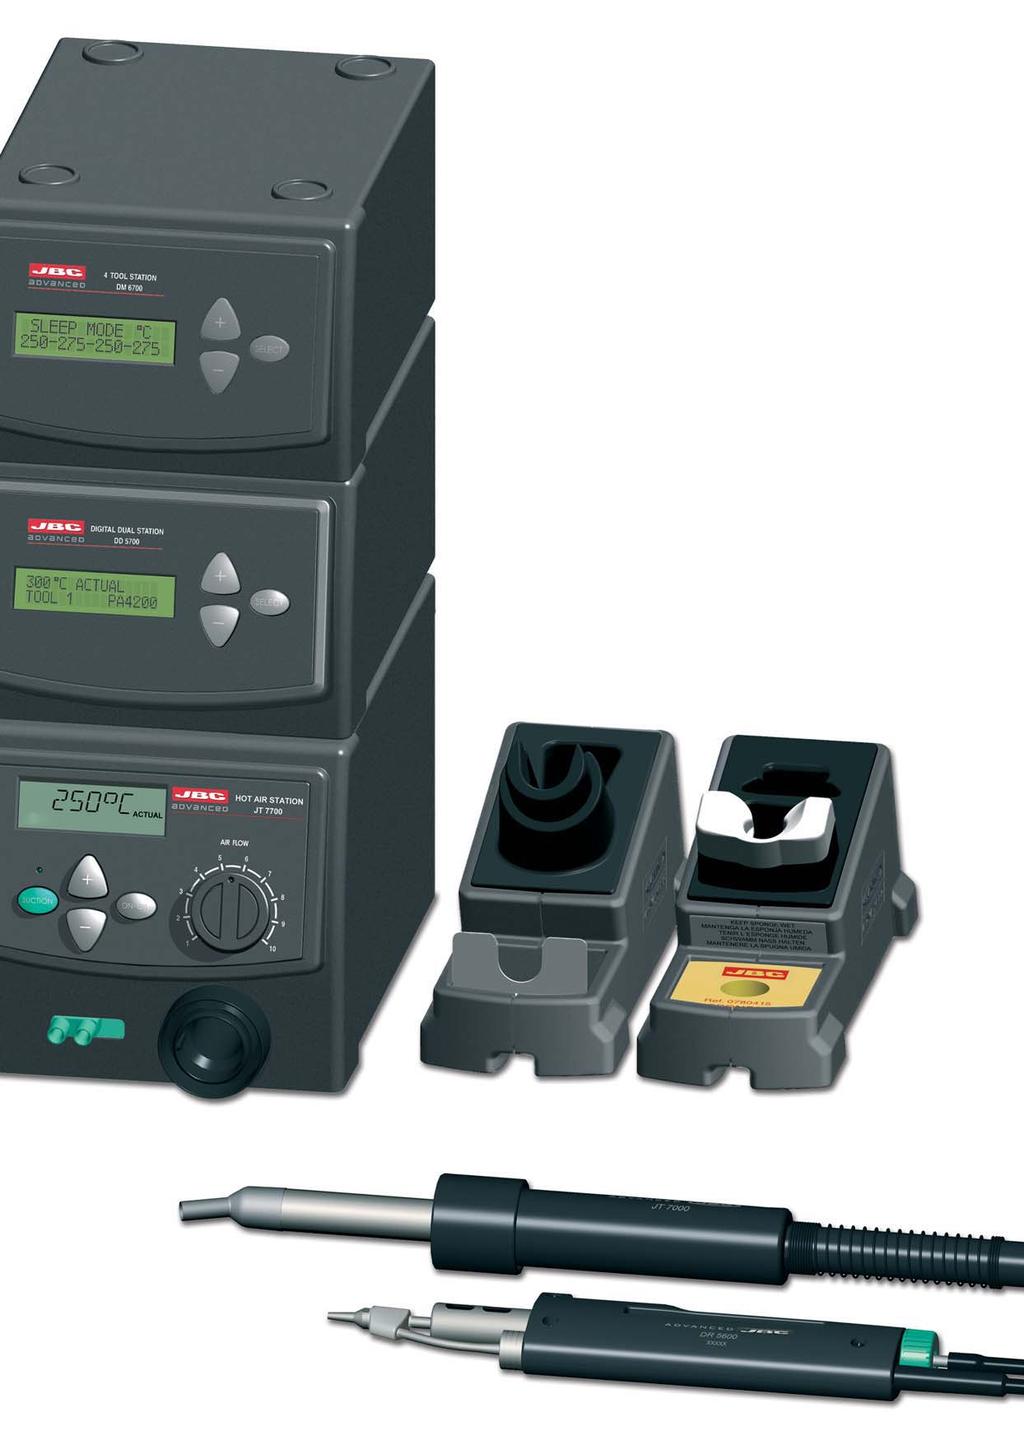 DM 6700 4 Tool control unit DD 5700 Digital dual control unit J T 7700 Hot air station Featured in this configuration: The 2245 is the soldering handpiece for general use, while the 2210 is designed